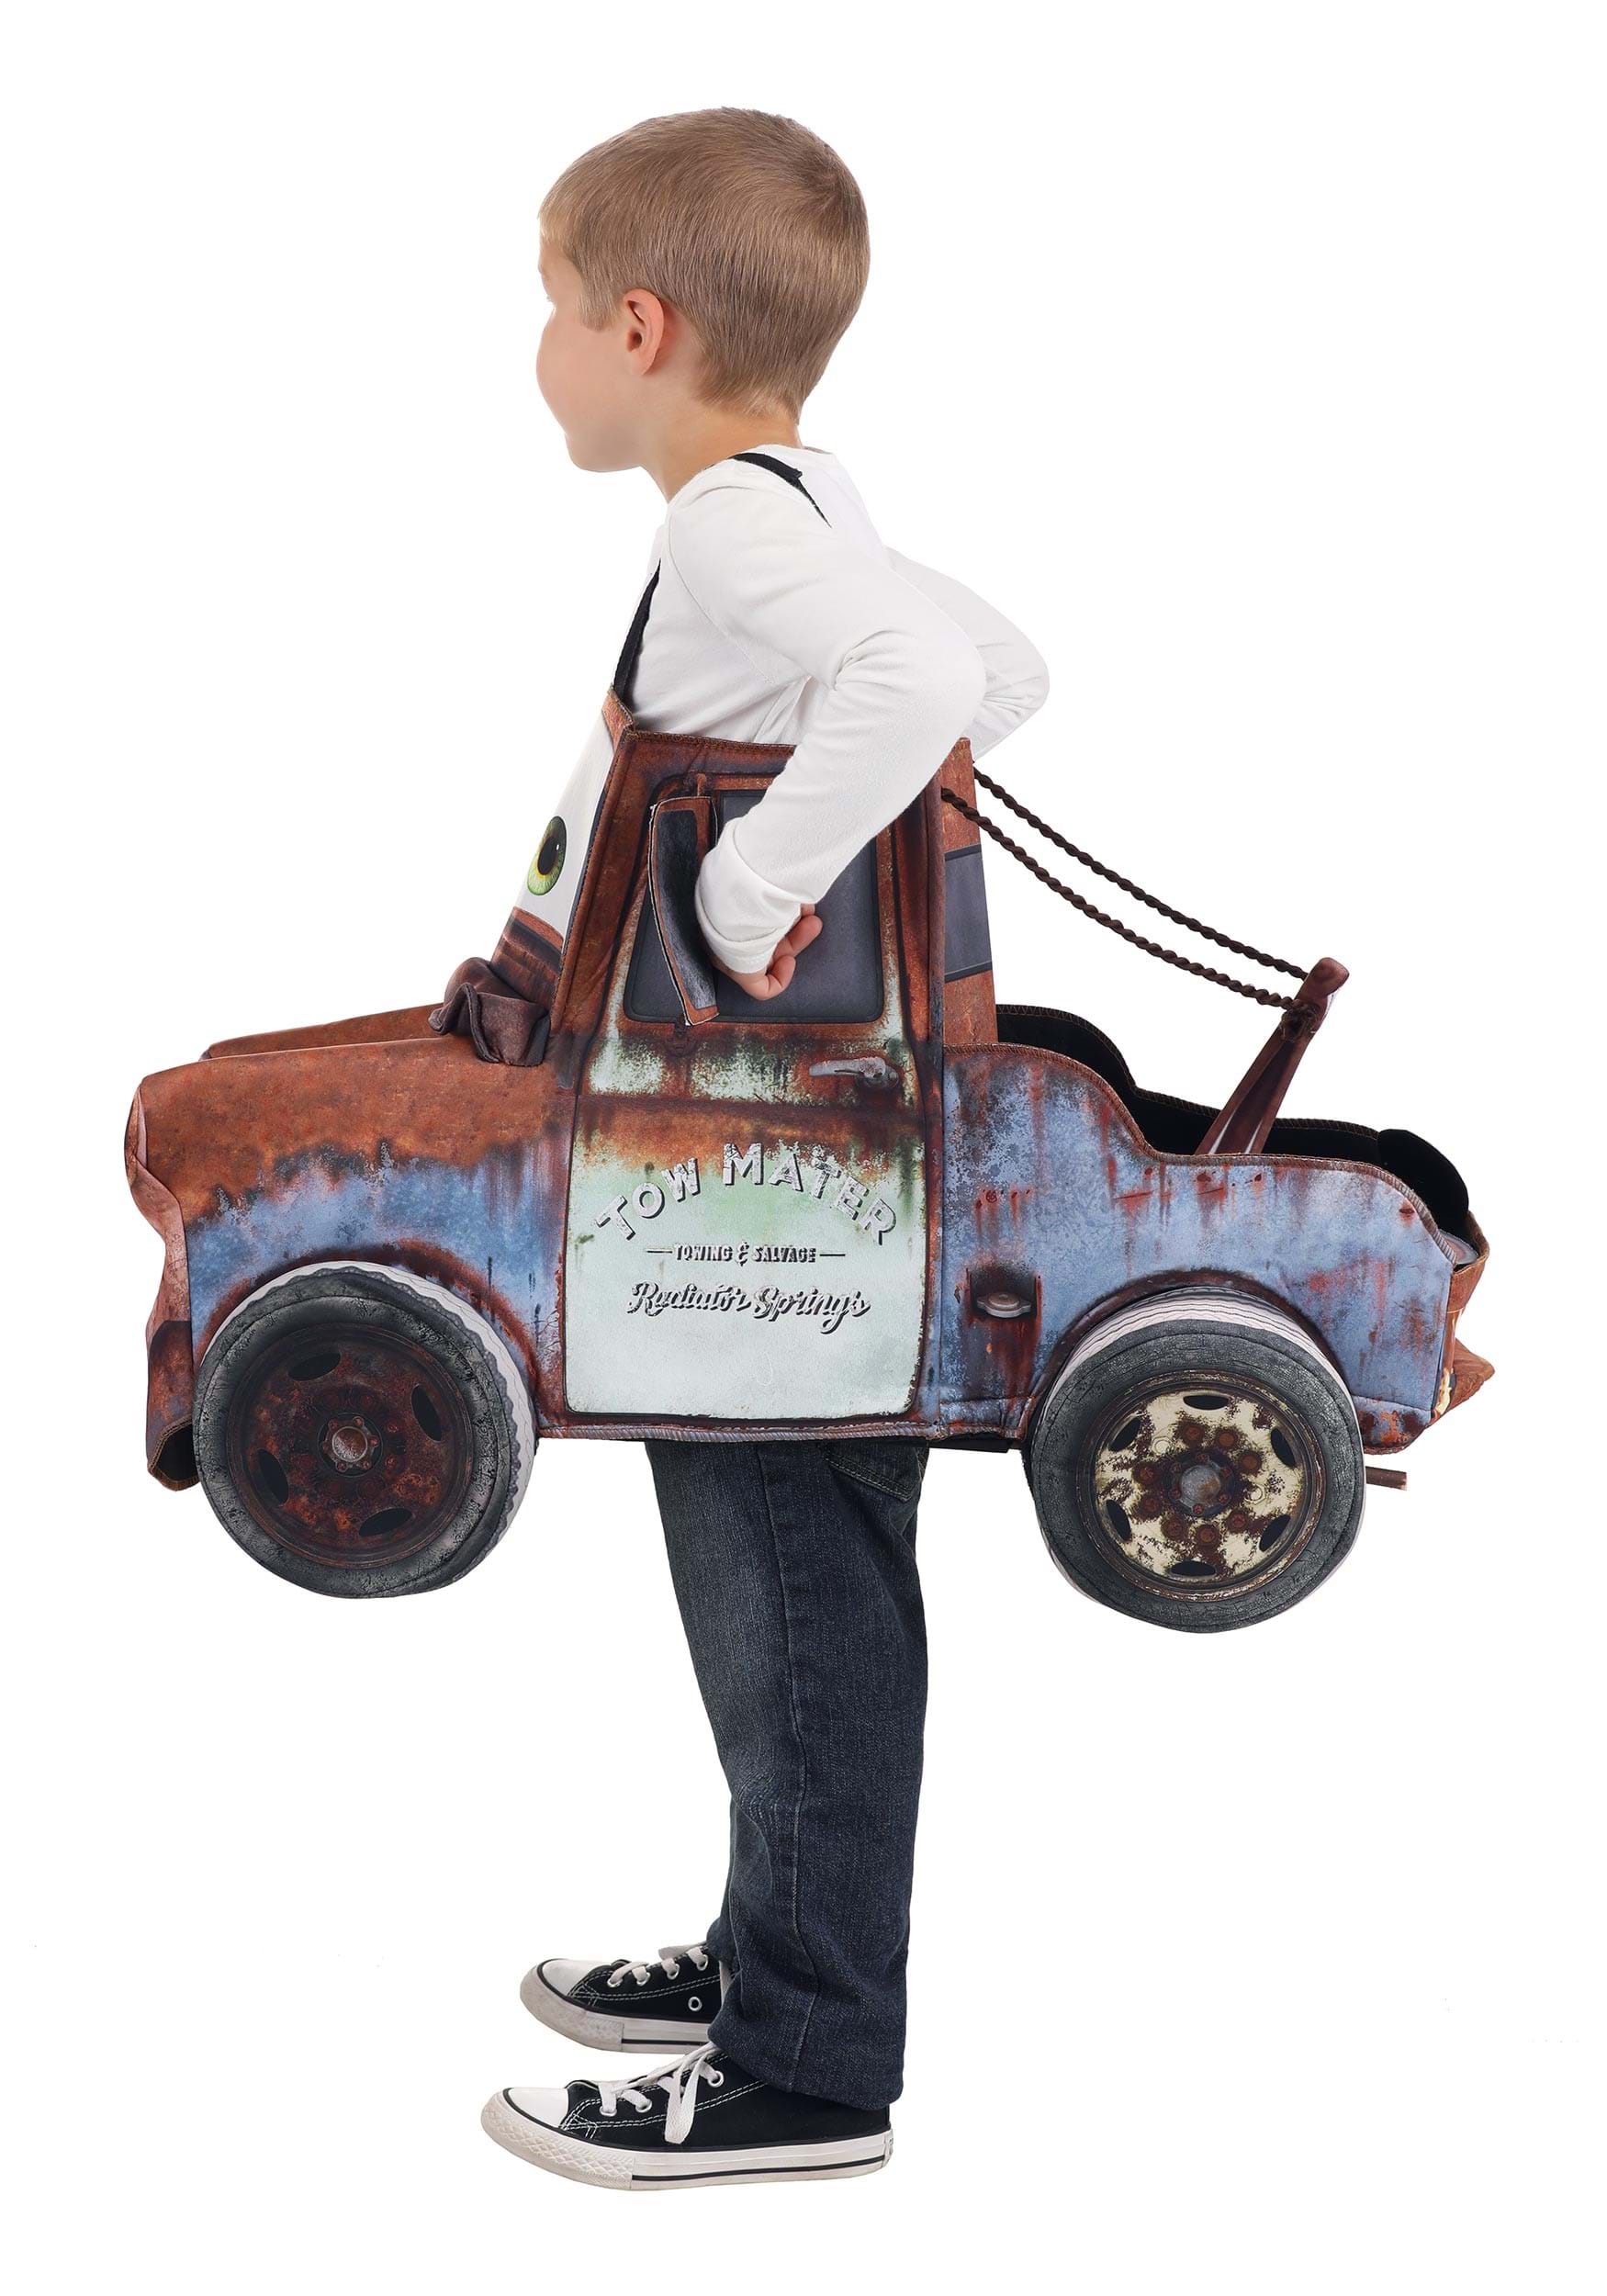 Cars Tow Mater Kids Deluxe Costume